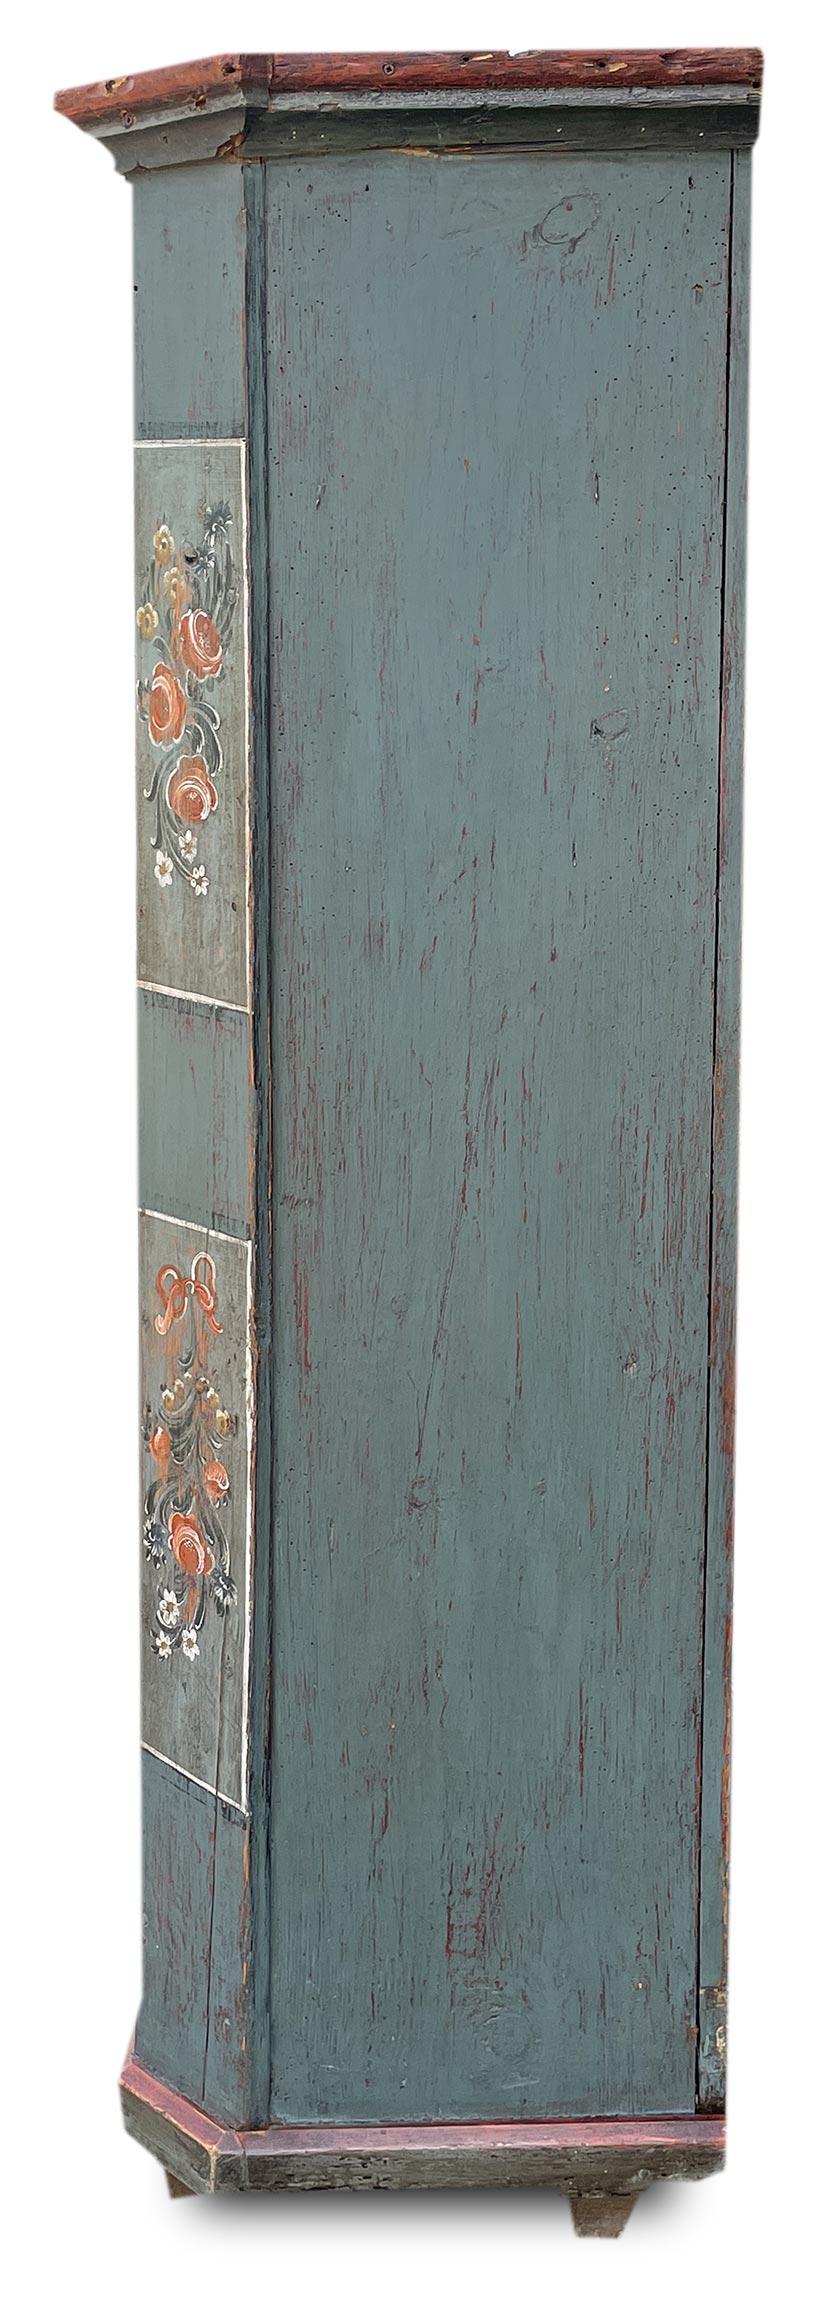 Early 19th Century Blue Floral Painted Cabinet In Good Condition For Sale In Albignasego, IT